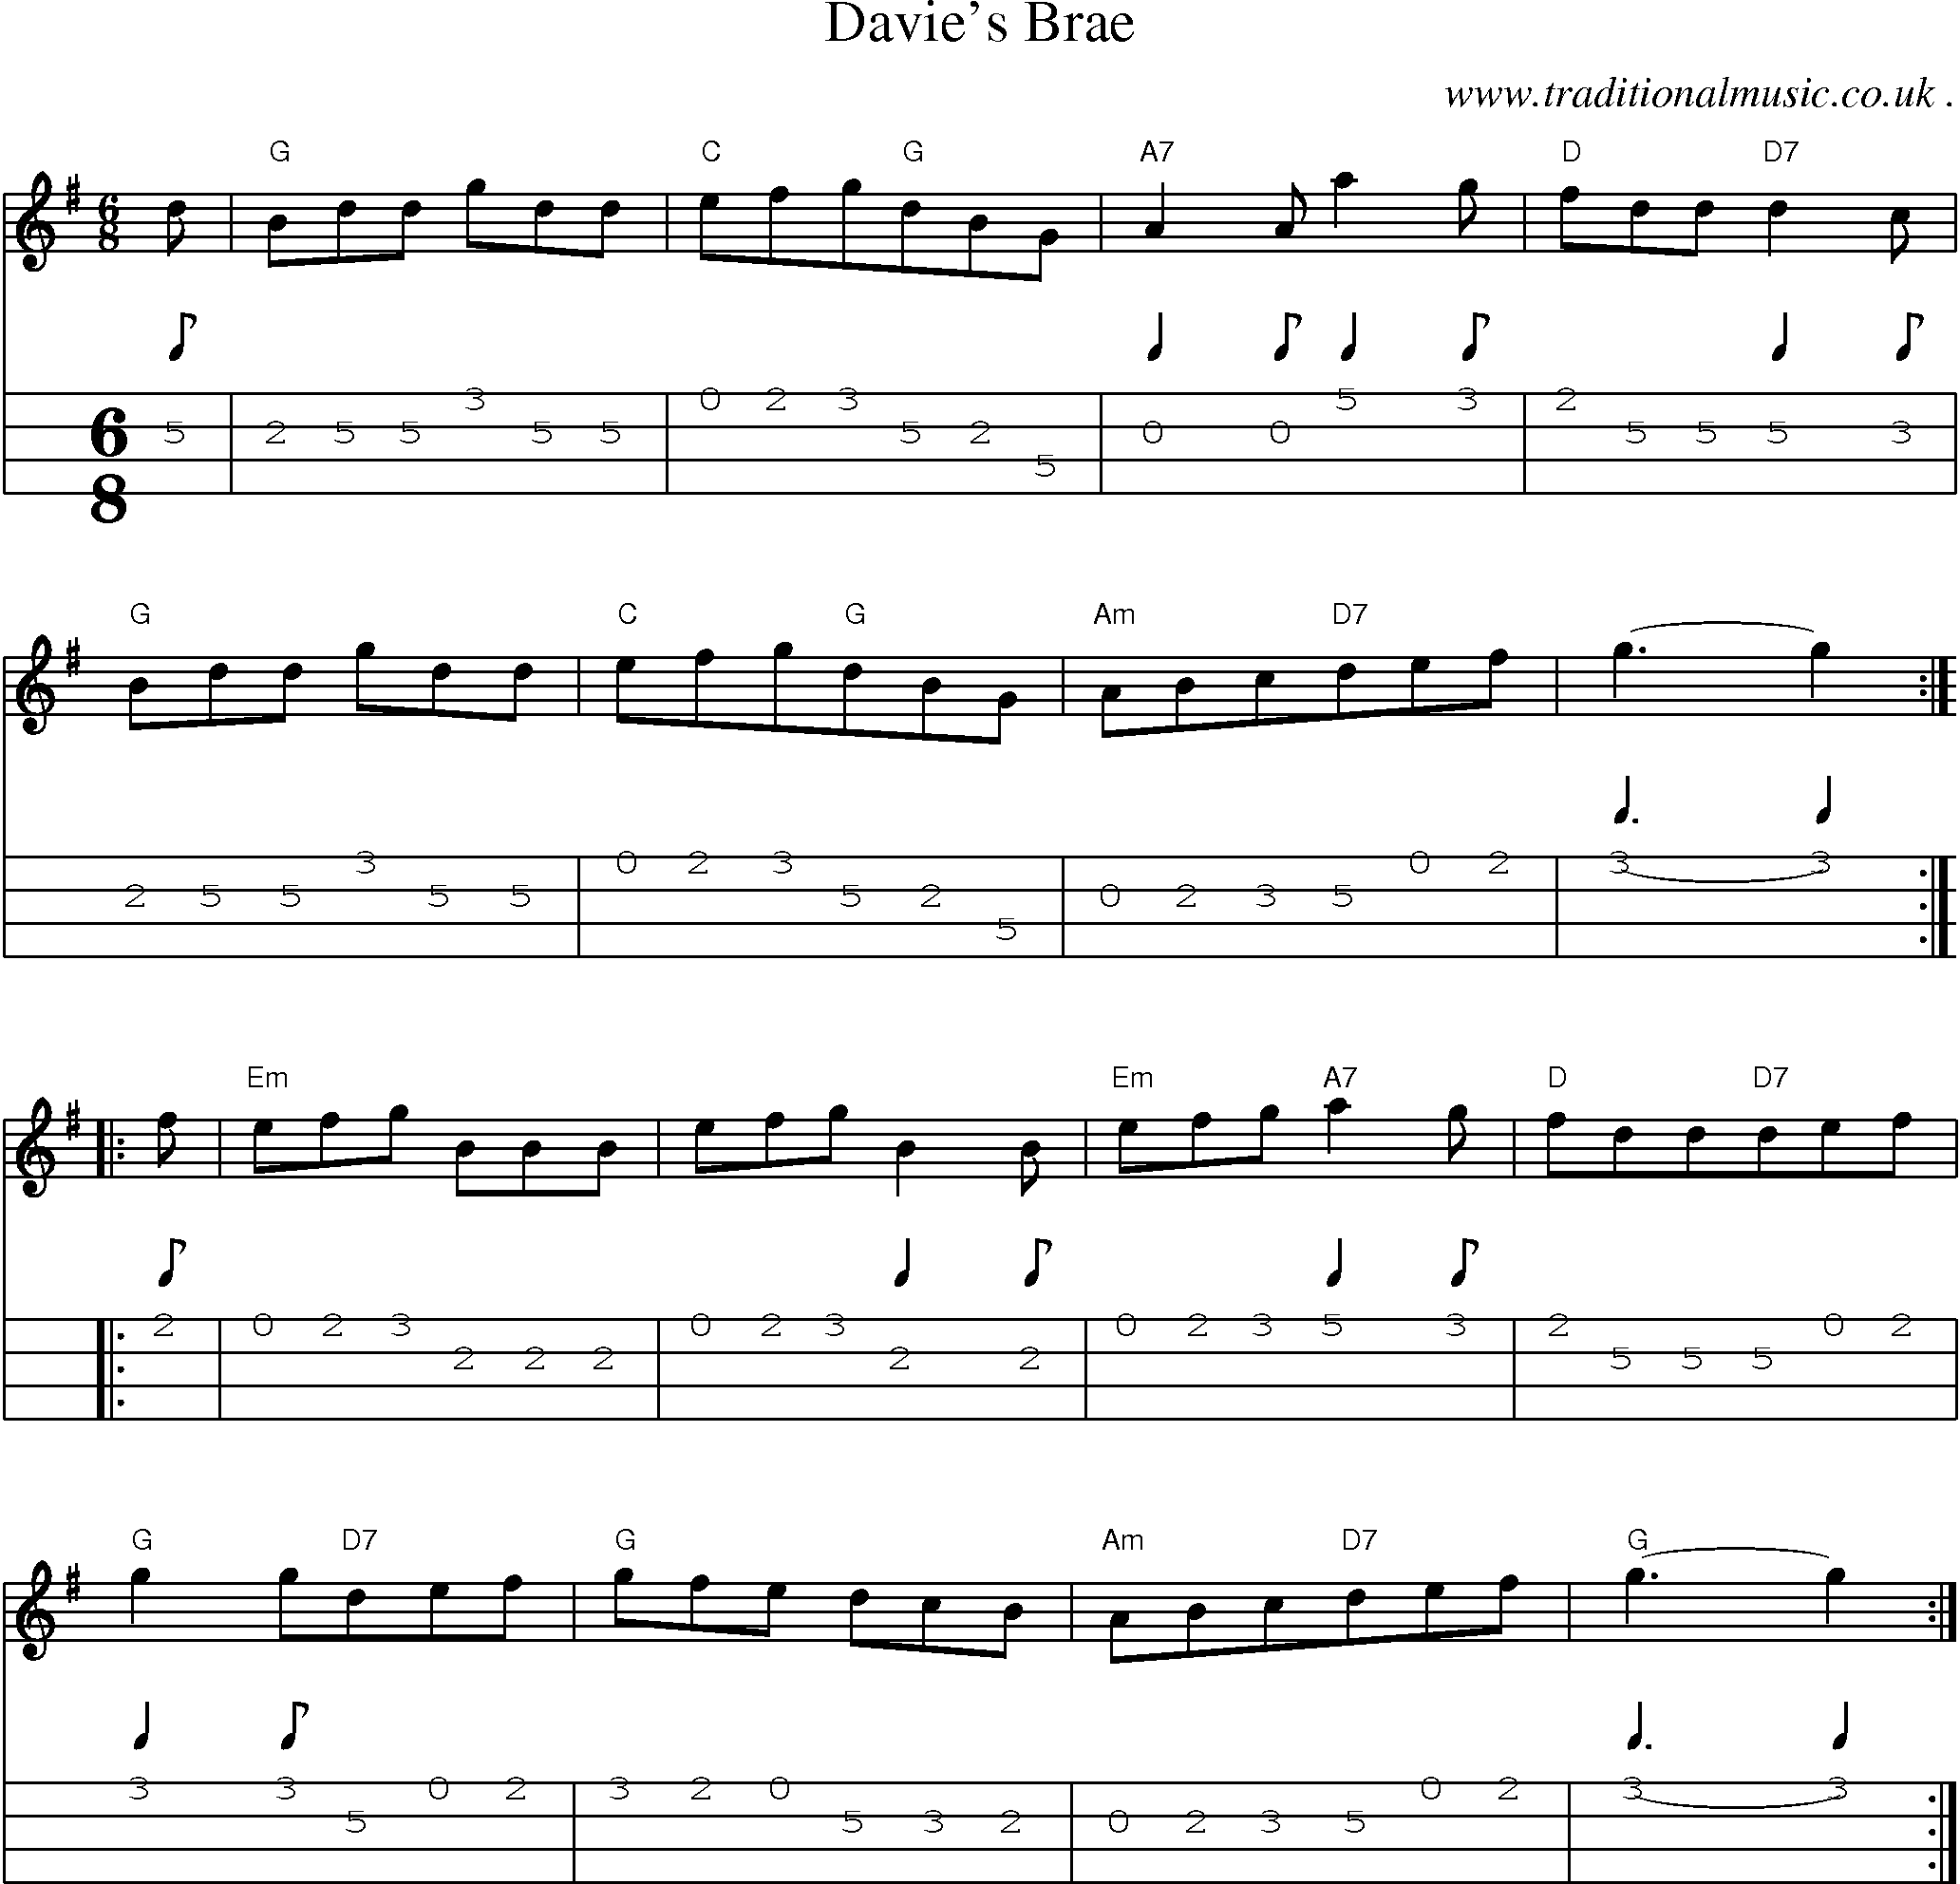 Sheet-Music and Mandolin Tabs for Davies Brae